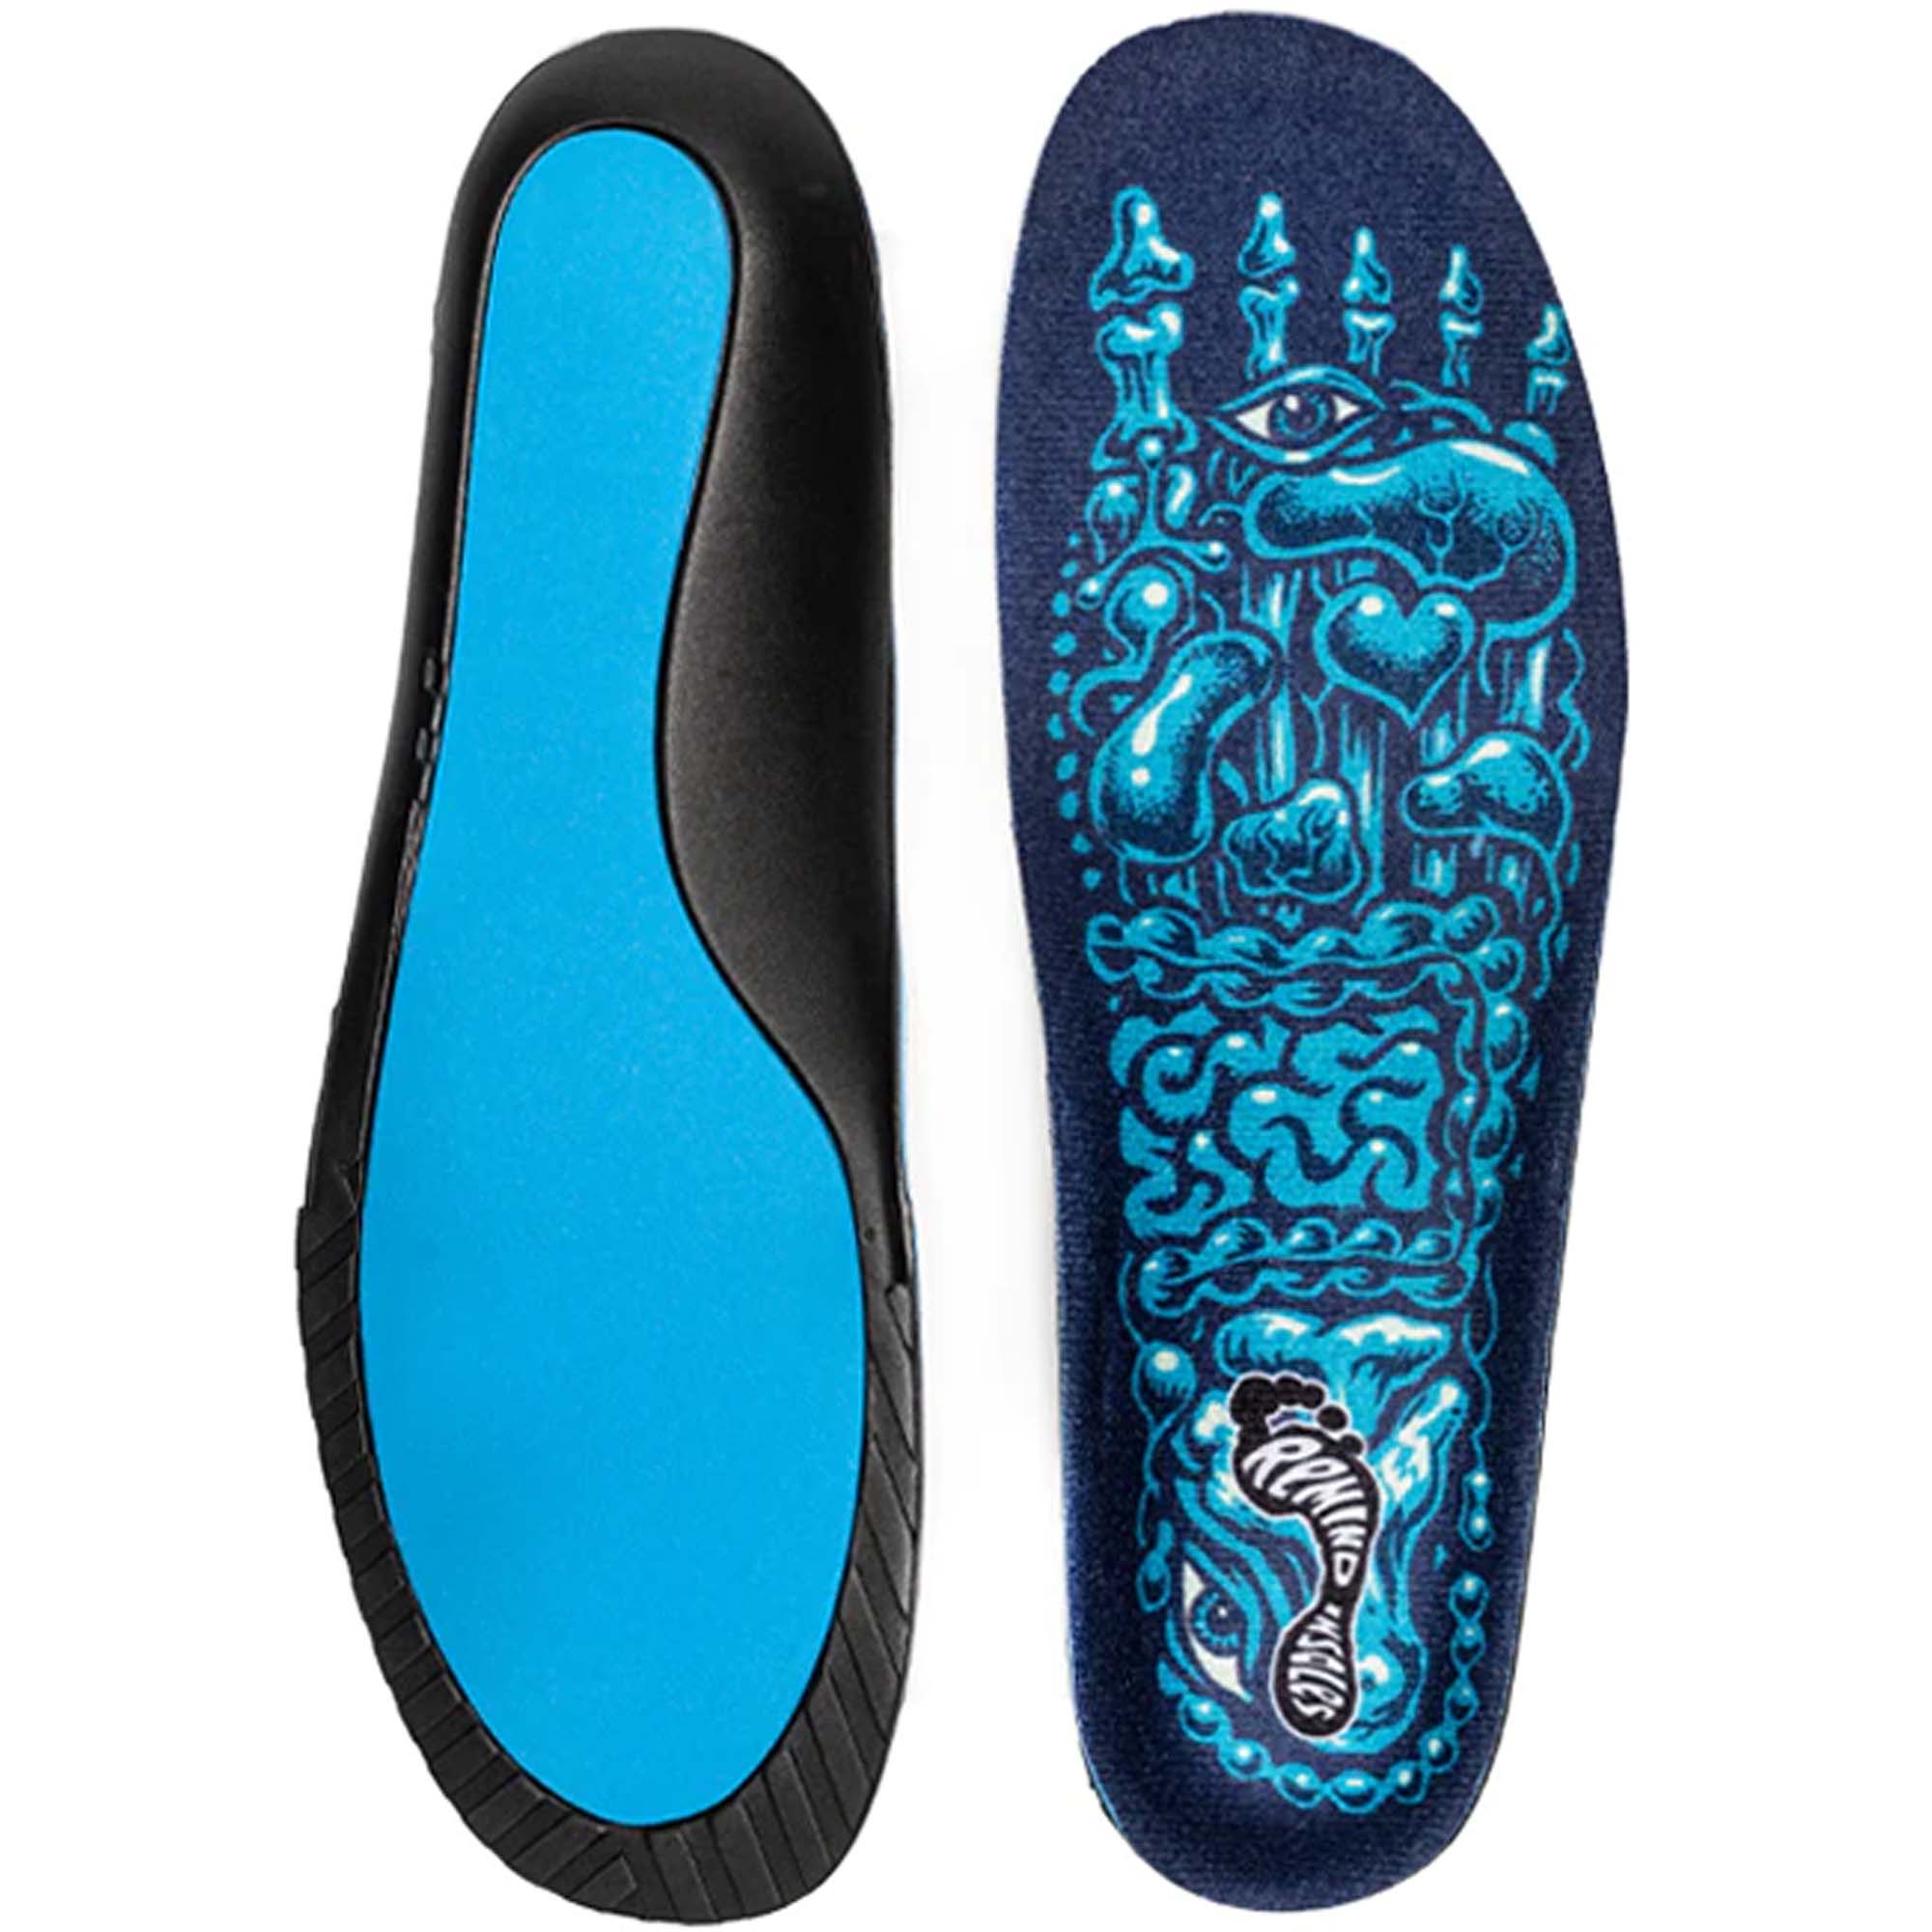 Remind Medic Classic Mid-High Arch Insole